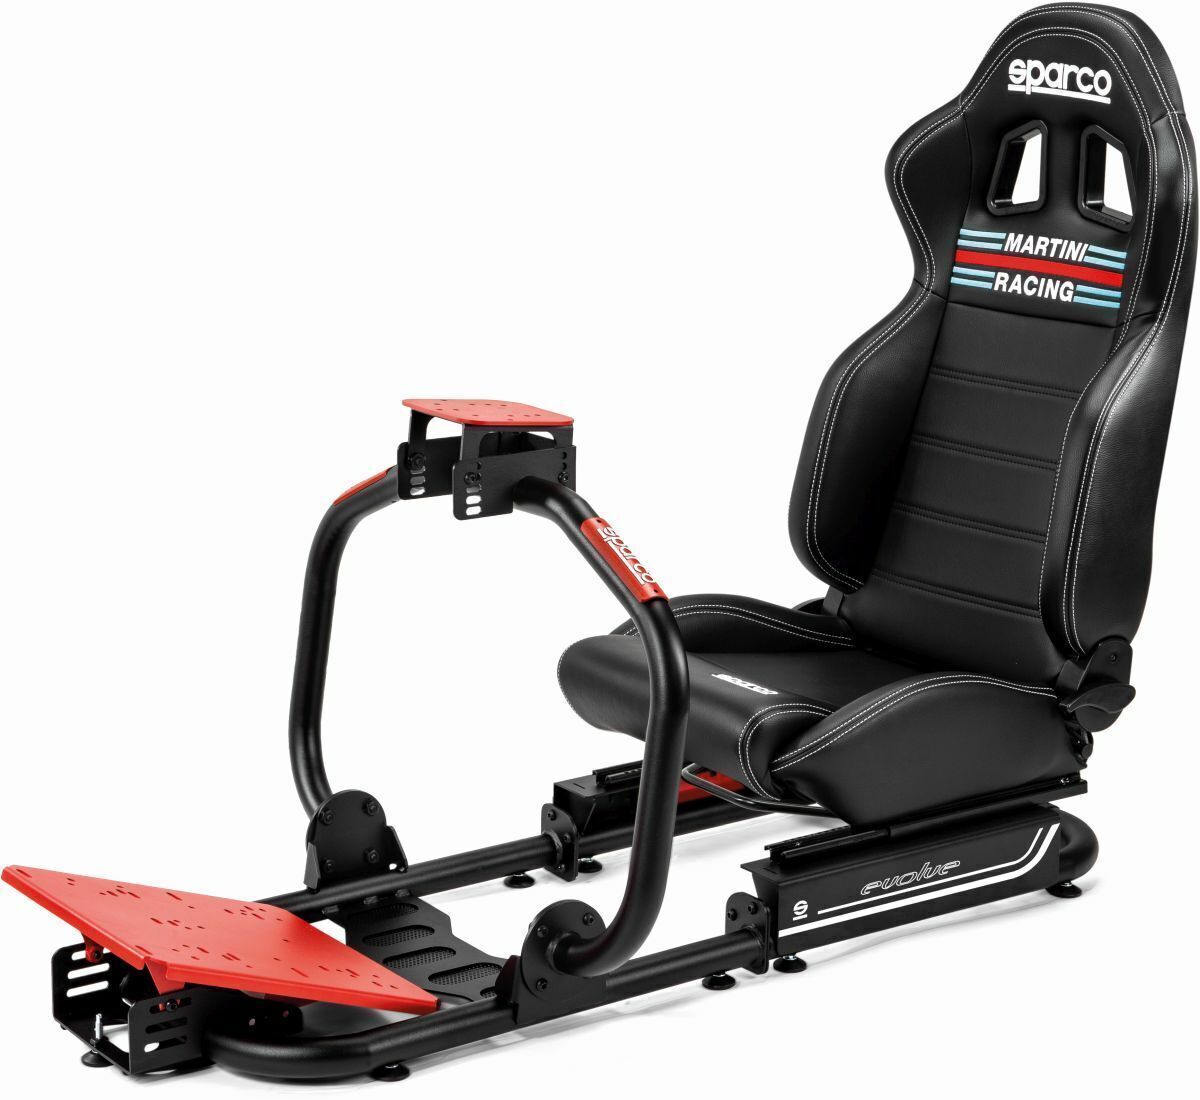 Sparco Evolve 3.0 Pro with Sparco R100 Martini Racing Sky Seat Sim Racing